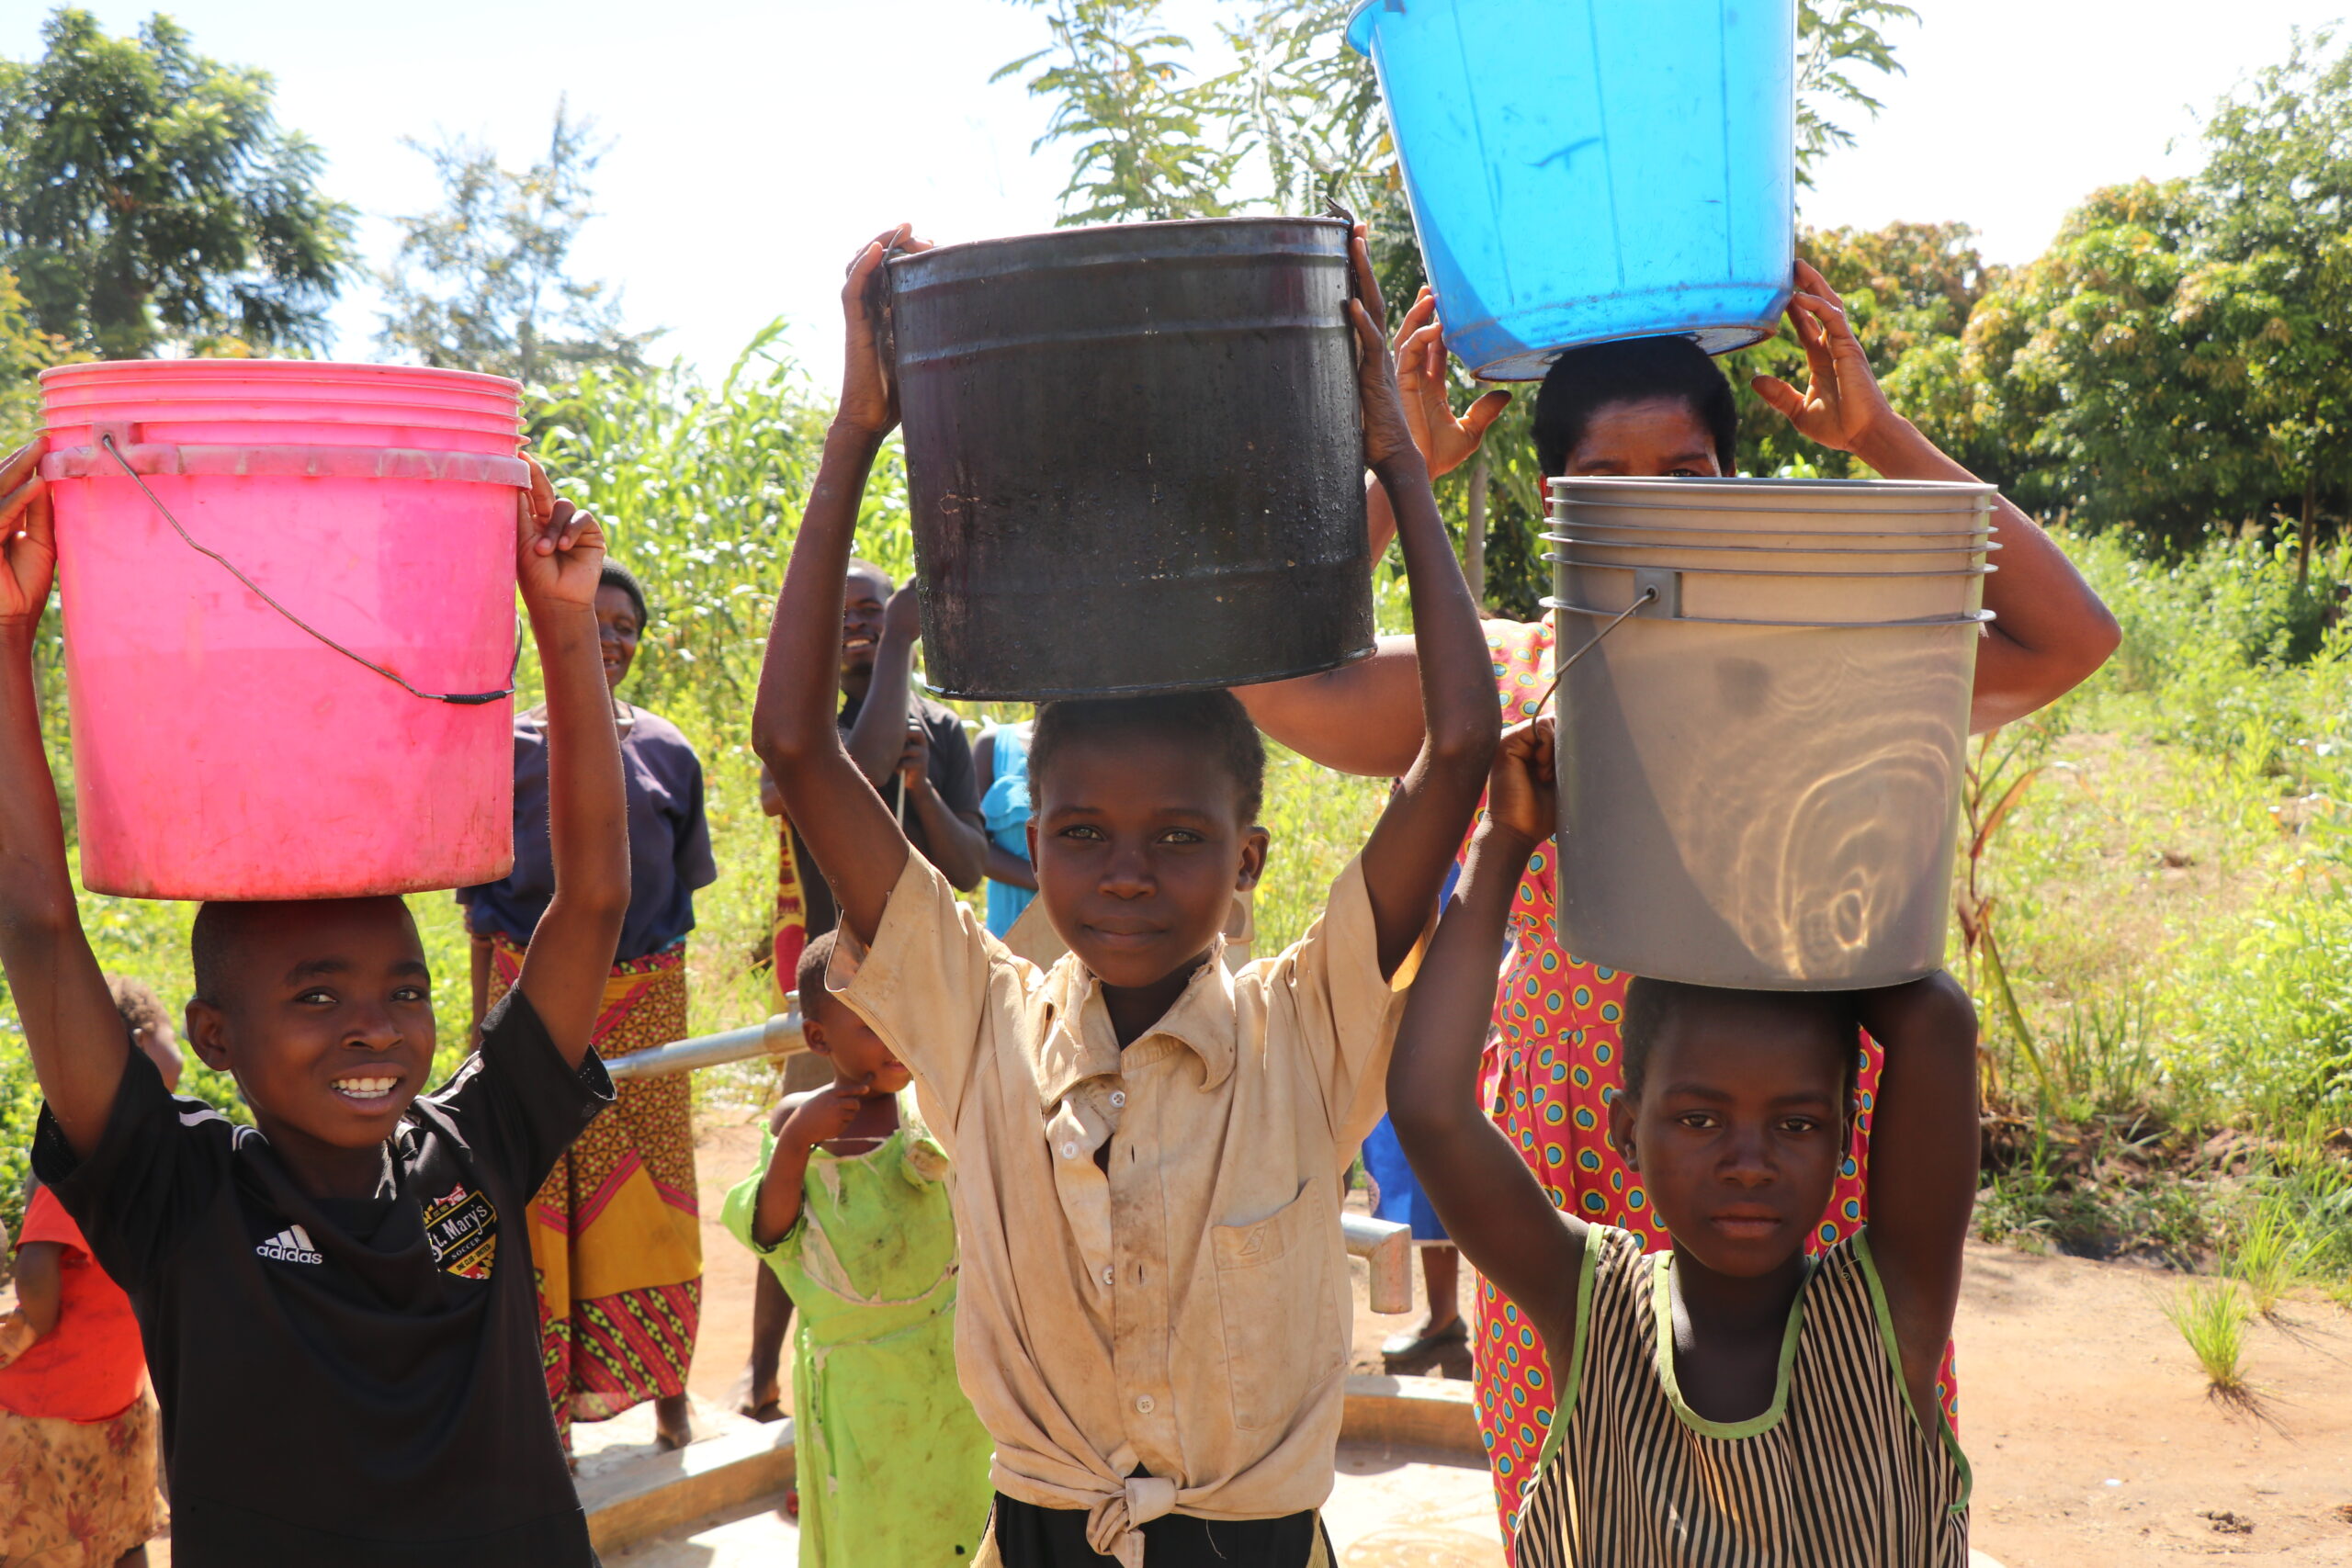 Kids in Malawi hold buckets of water on their heads